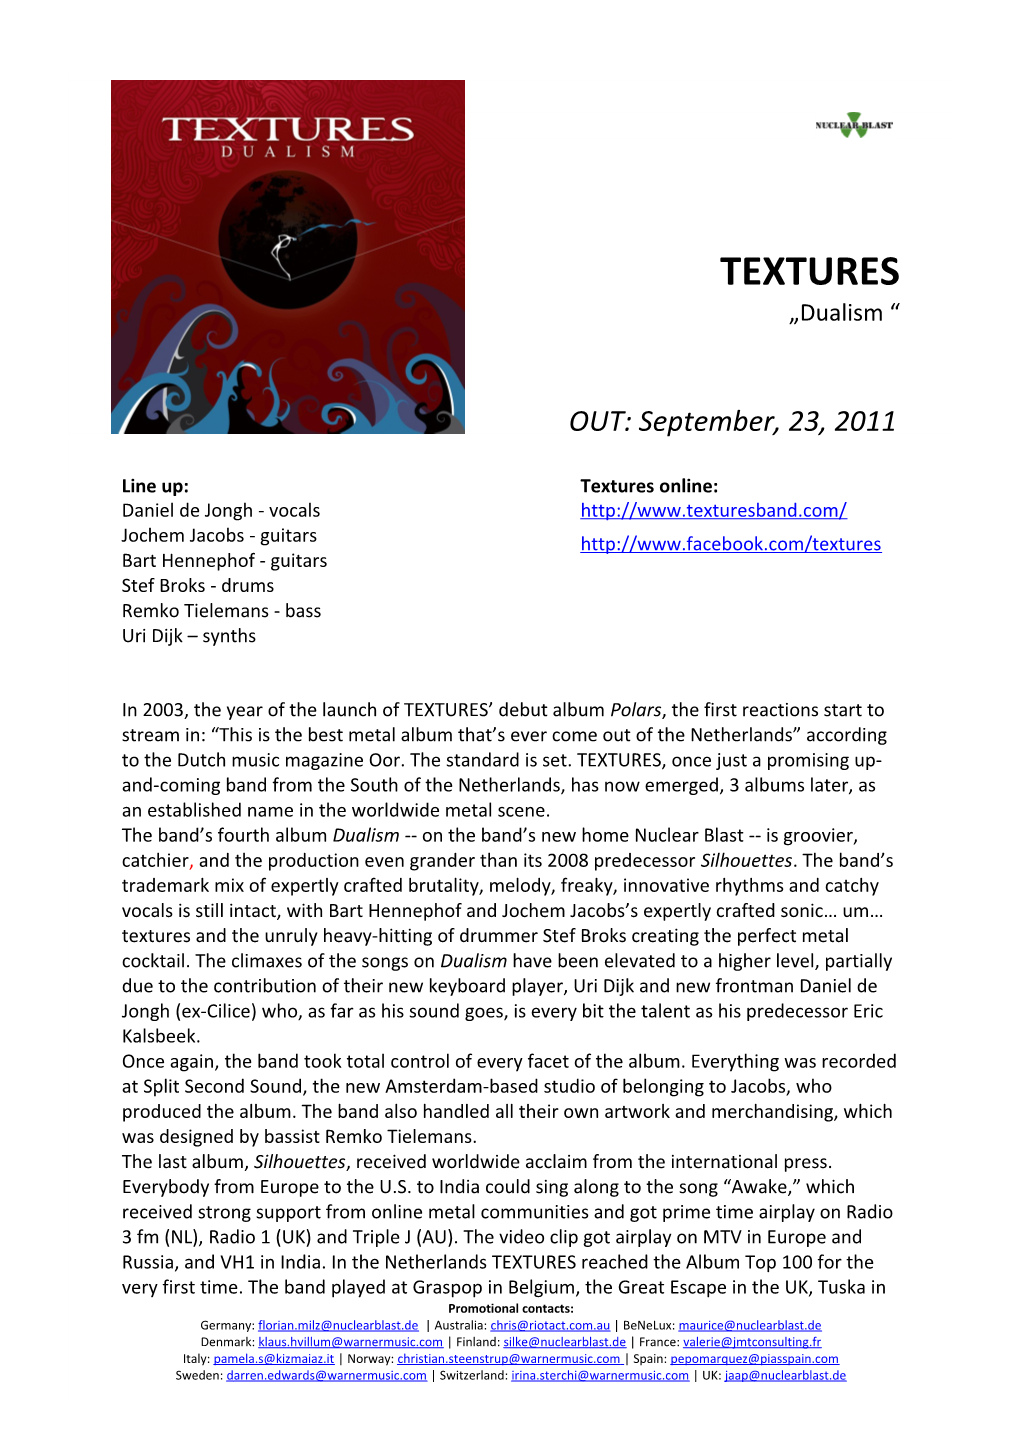 In 2003, the Year of the Launch of TEXTURES Debut Albumpolars, the First Reactions Start